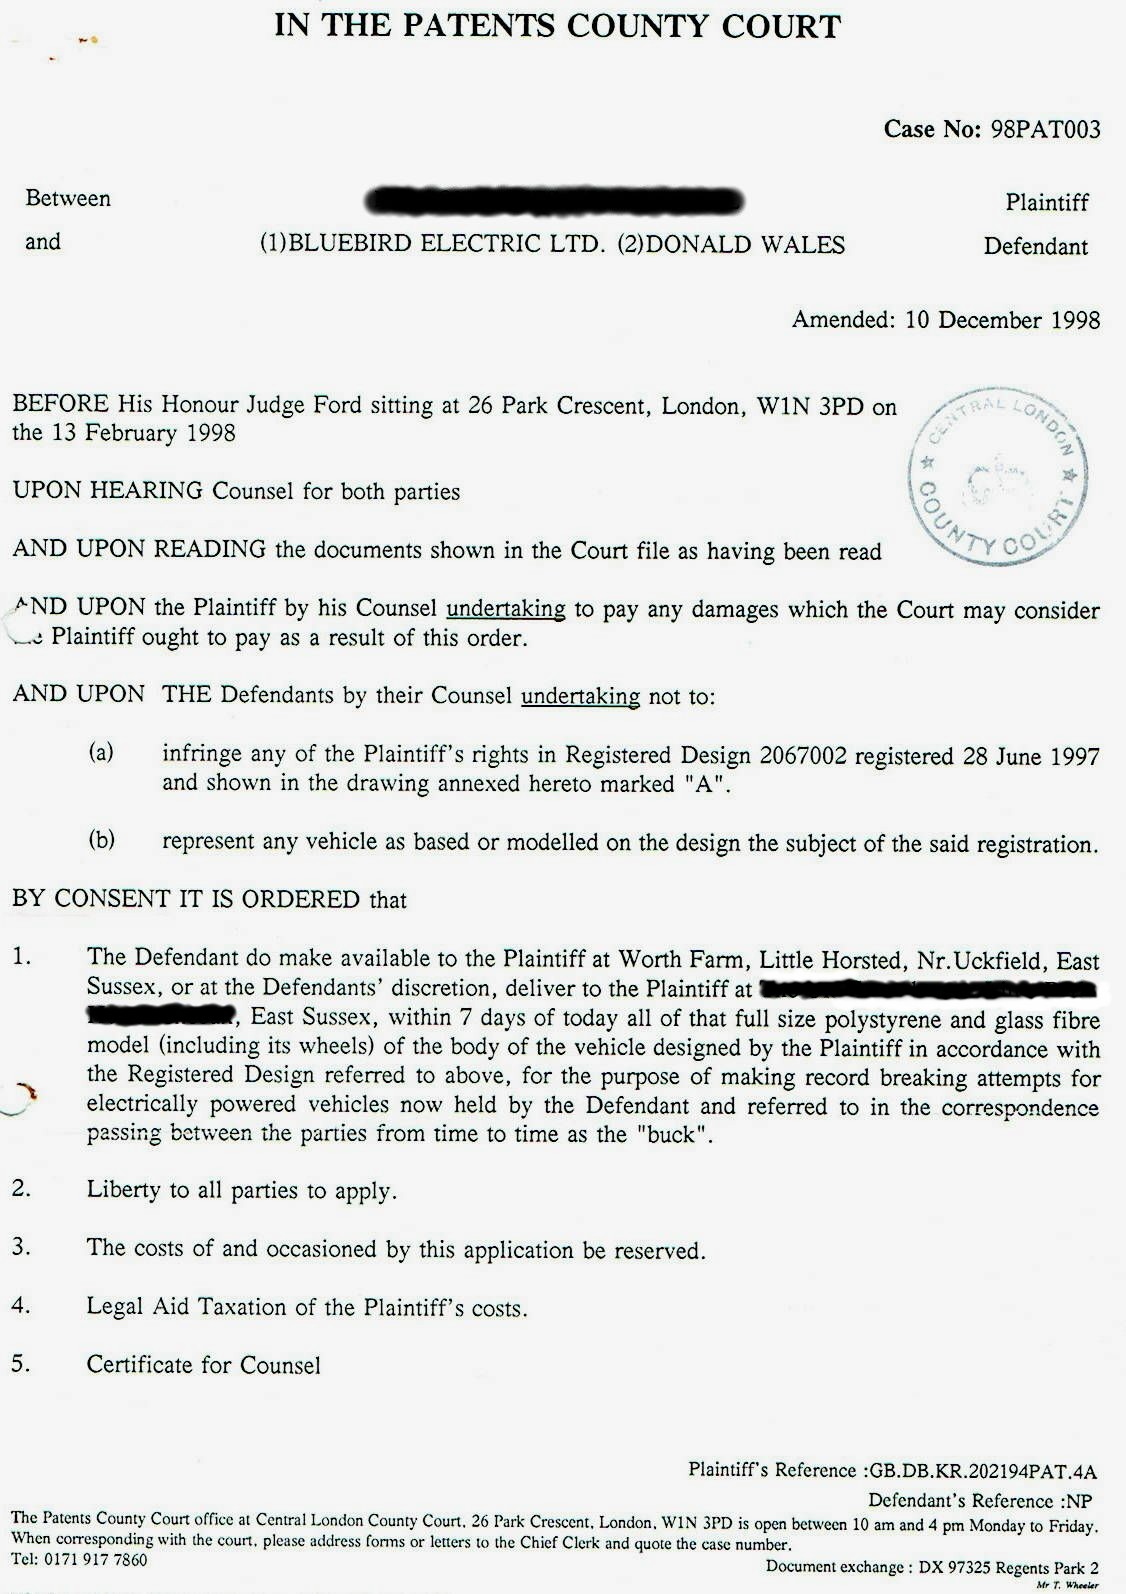 A Court Order (By Consent) forcing Donald Charles Wales and his company Bluebird Electric Limited, Worth Farm, Little Horsted, near Uckfield East Sussex to return the Copyright design registered land speed record car glassfibre buck and frame to the Plaintiff damages and costs to be assessed if not agreed.